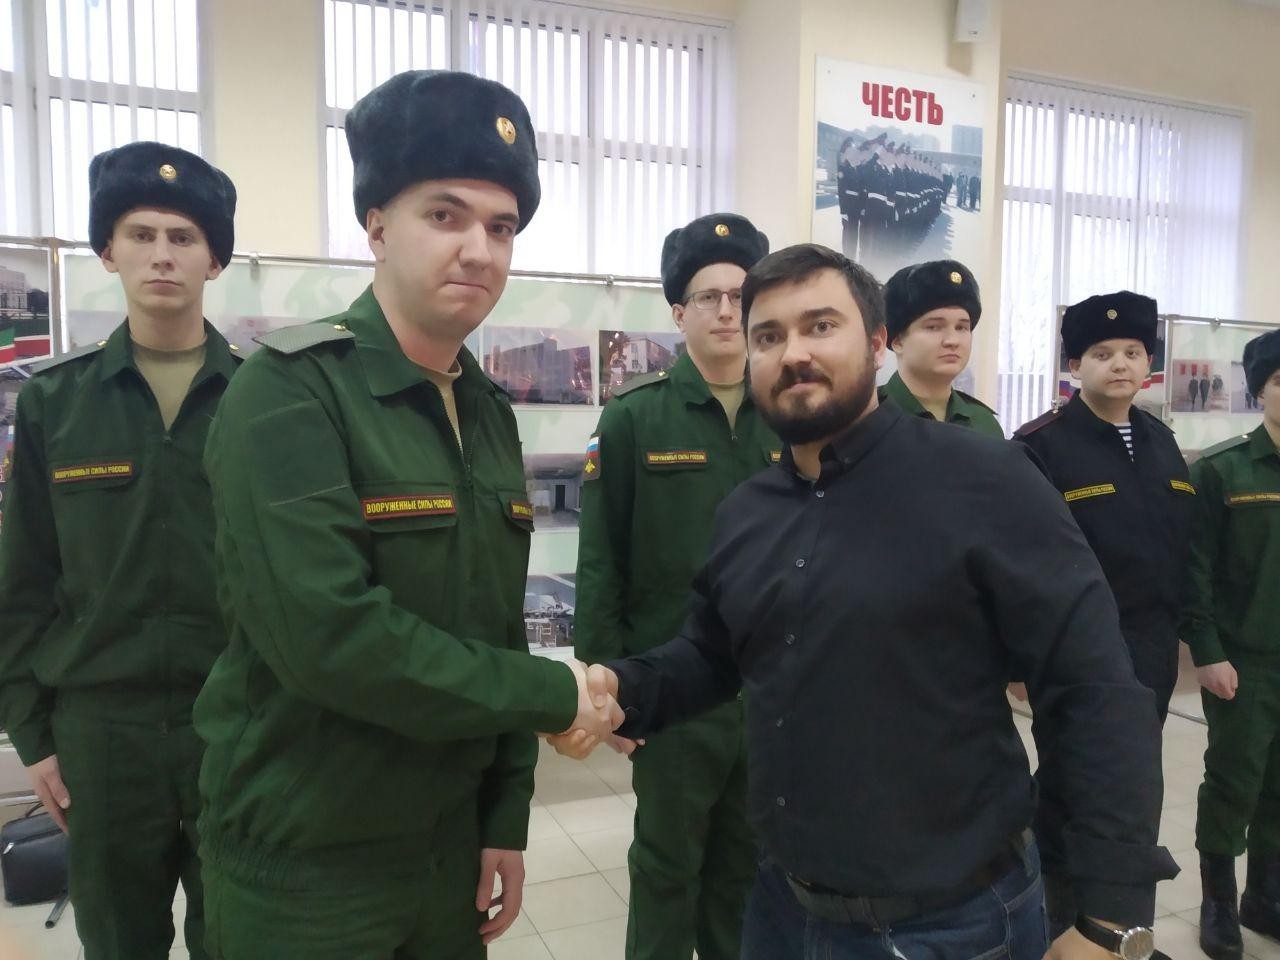 A graduate of LIRS, Evgeni Denisov, is leaving for the scientific troop of the military innovation technopolis 'Era'